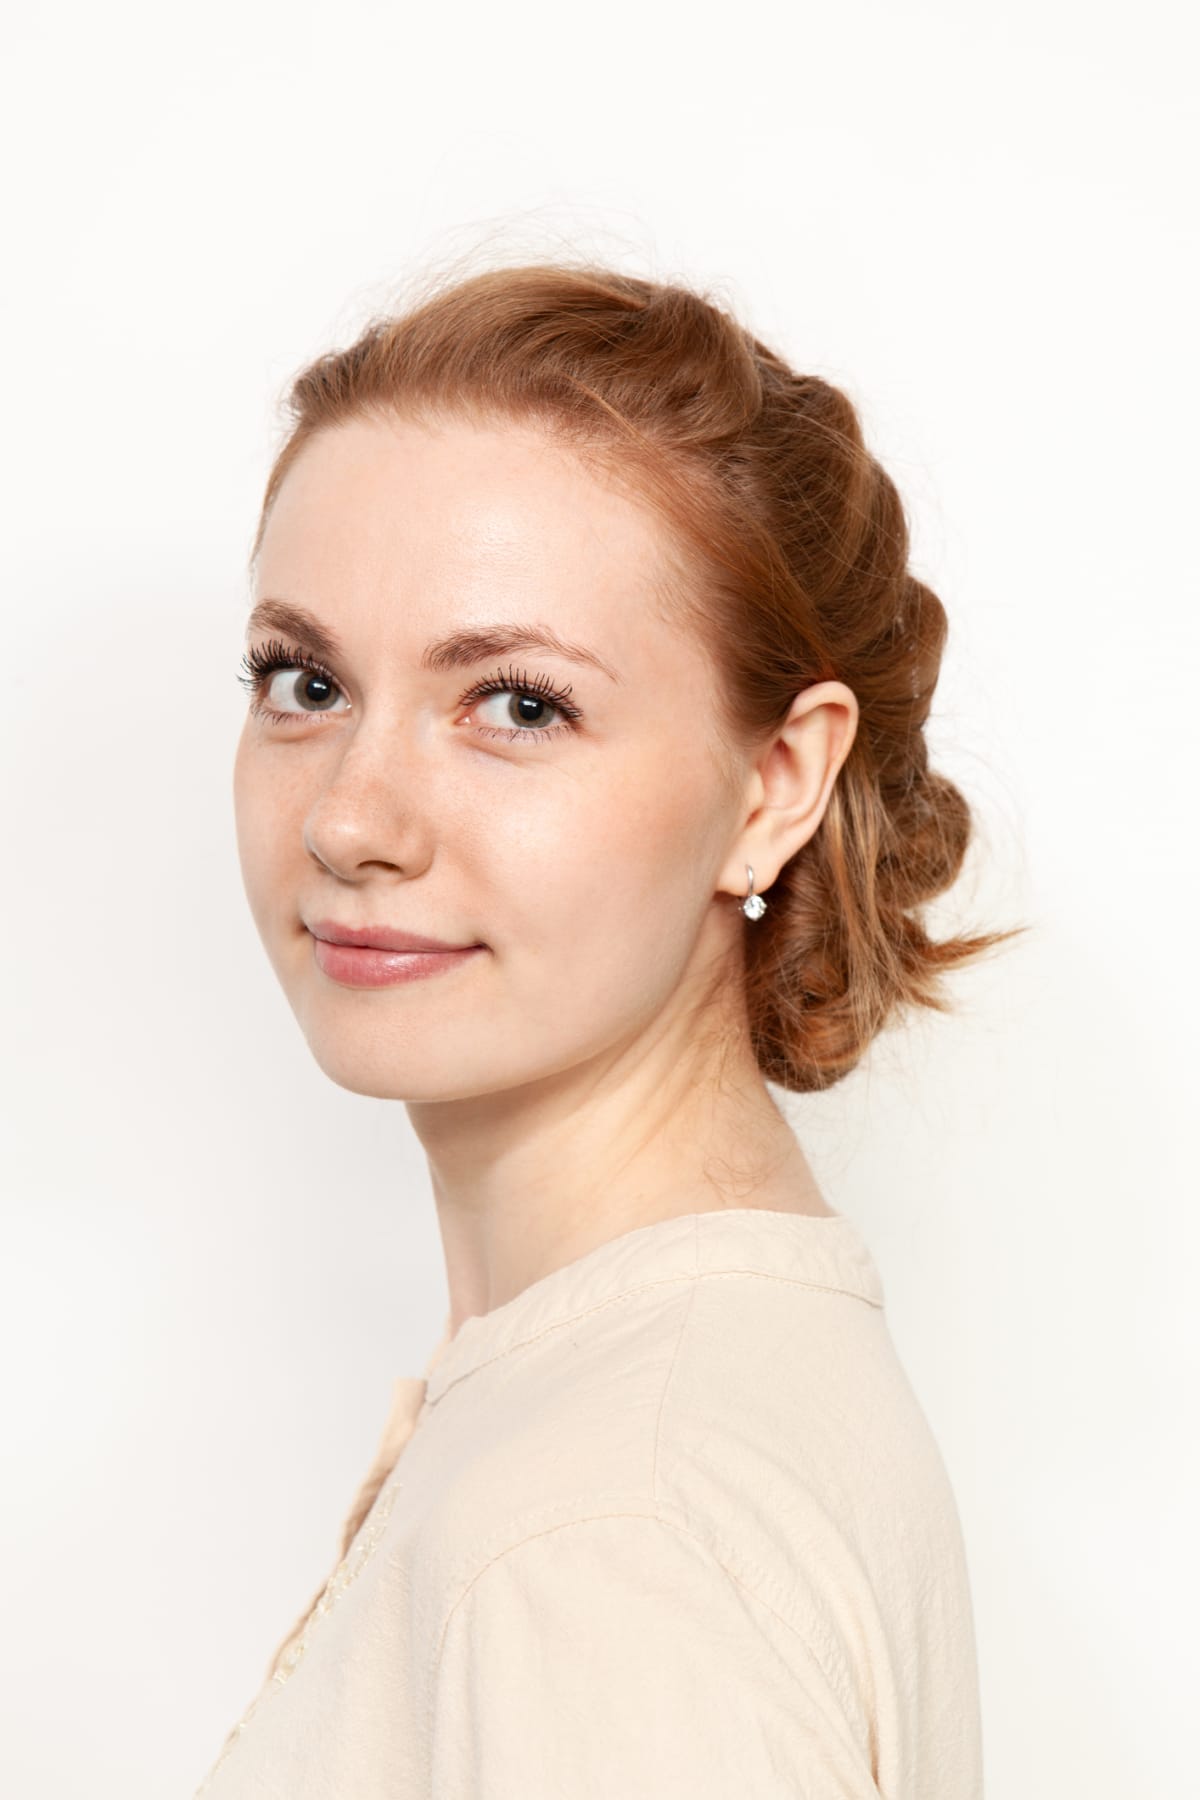 Close-up studio portrait of an attractive 24 year old red-haired woman in a beige blouse on a white background